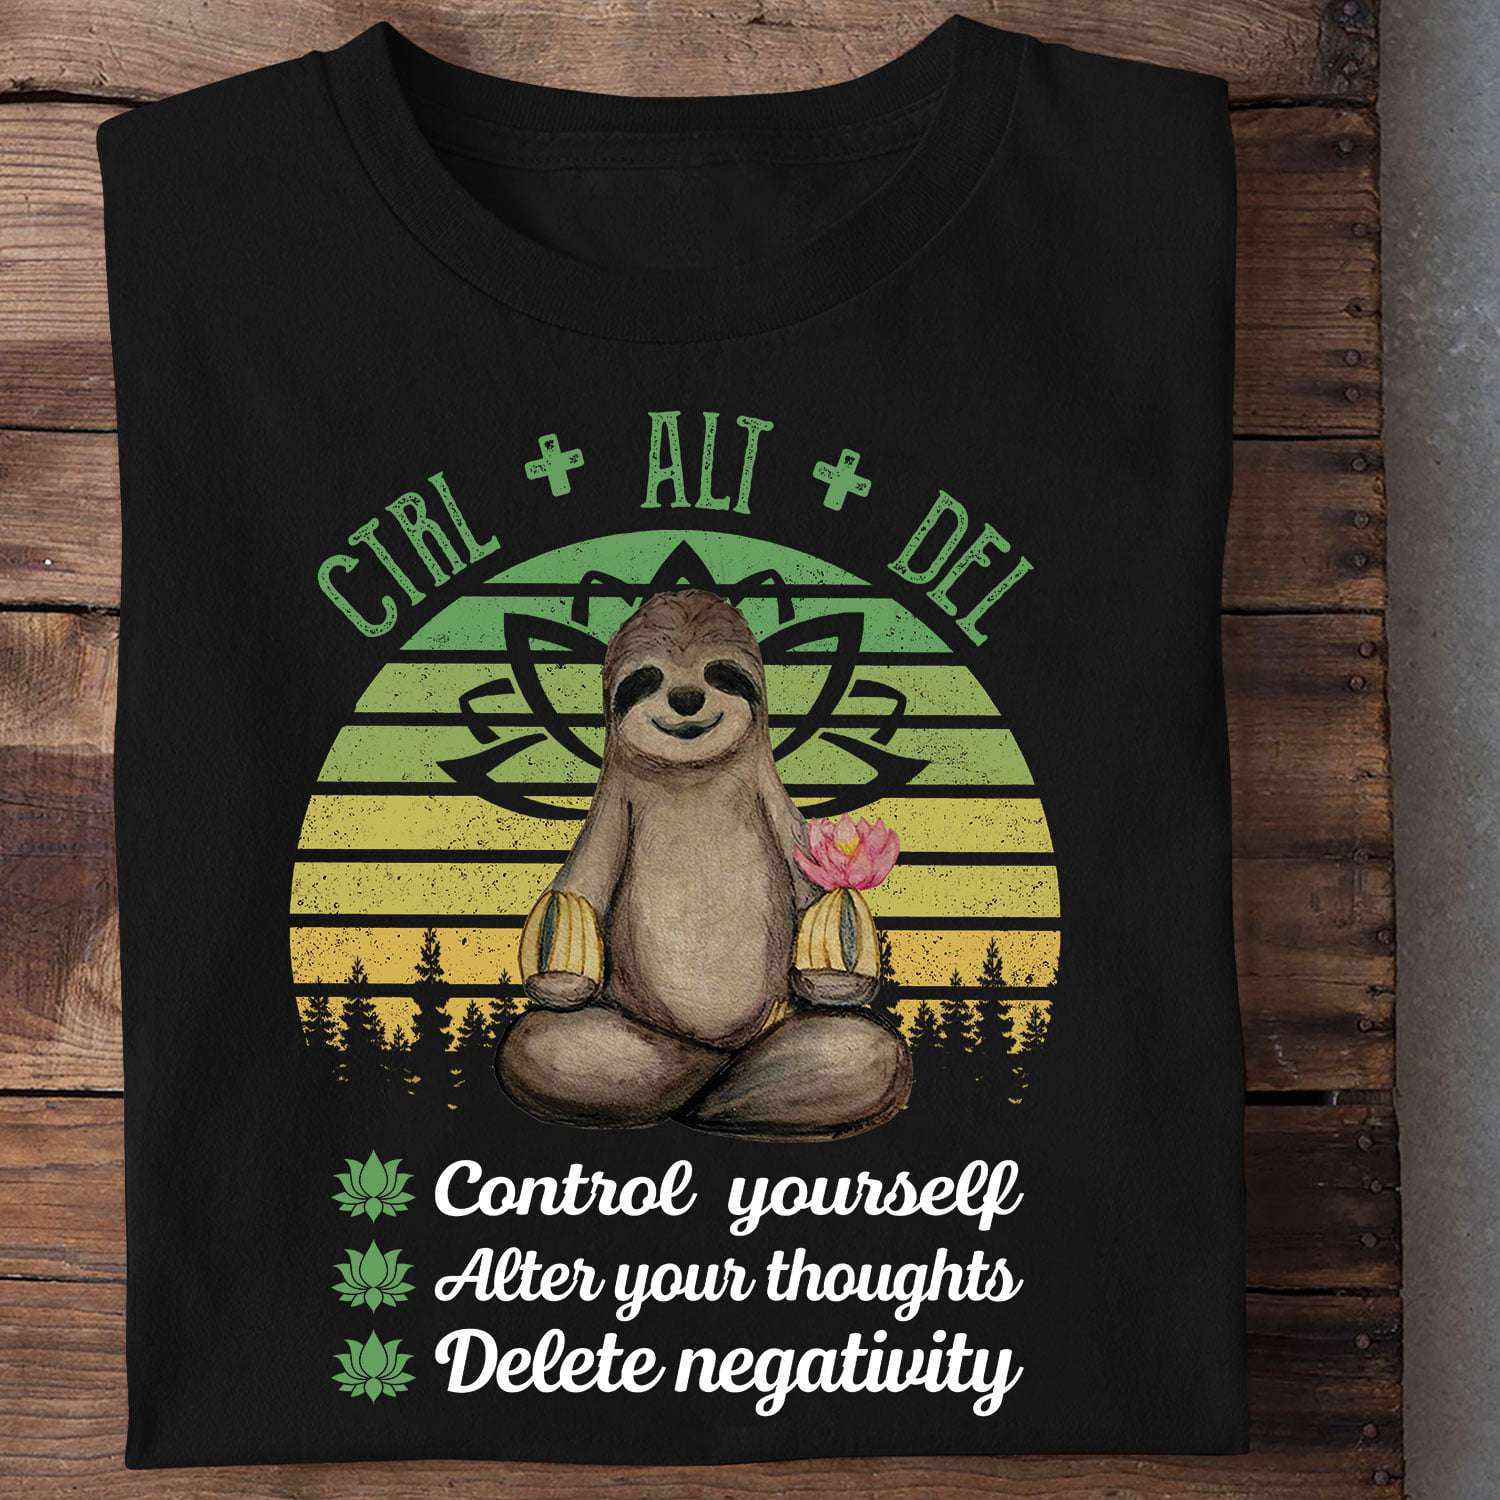 Doing yoga sloth - Control yourself, after your thoughts, delete negativity